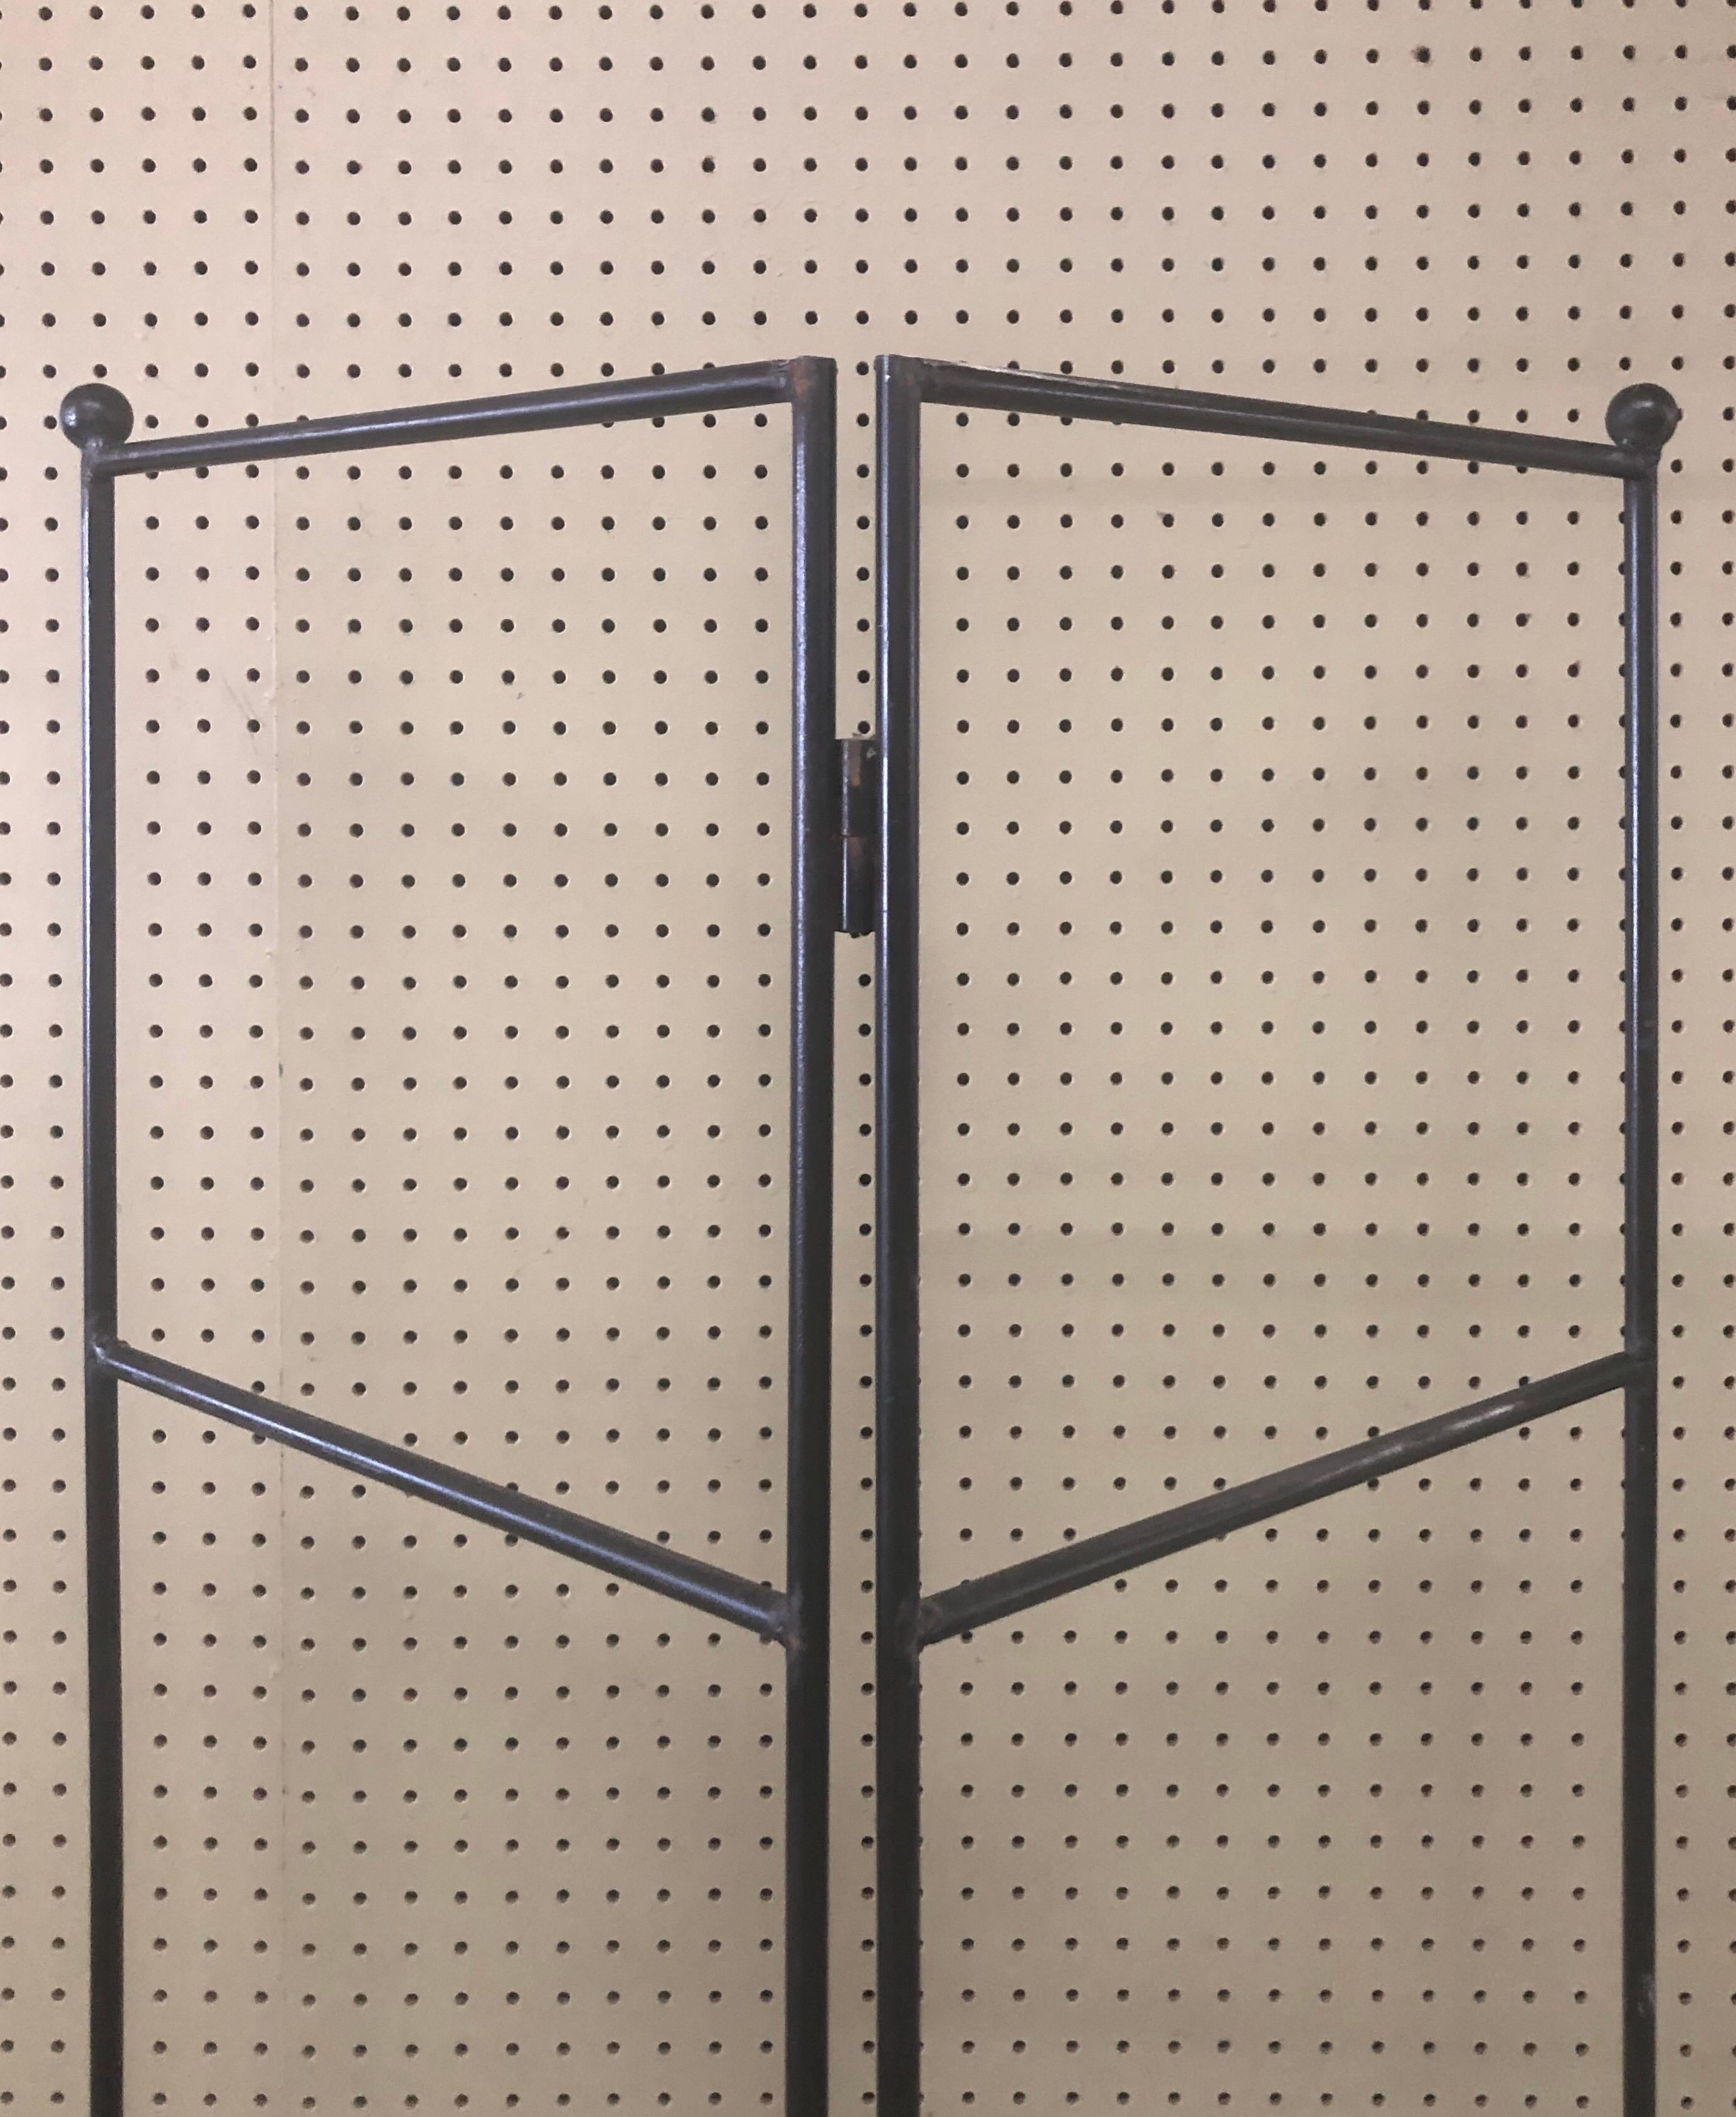 Minimalist Four-Panel Wrought Iron Room Divider / Screen In Good Condition For Sale In San Diego, CA